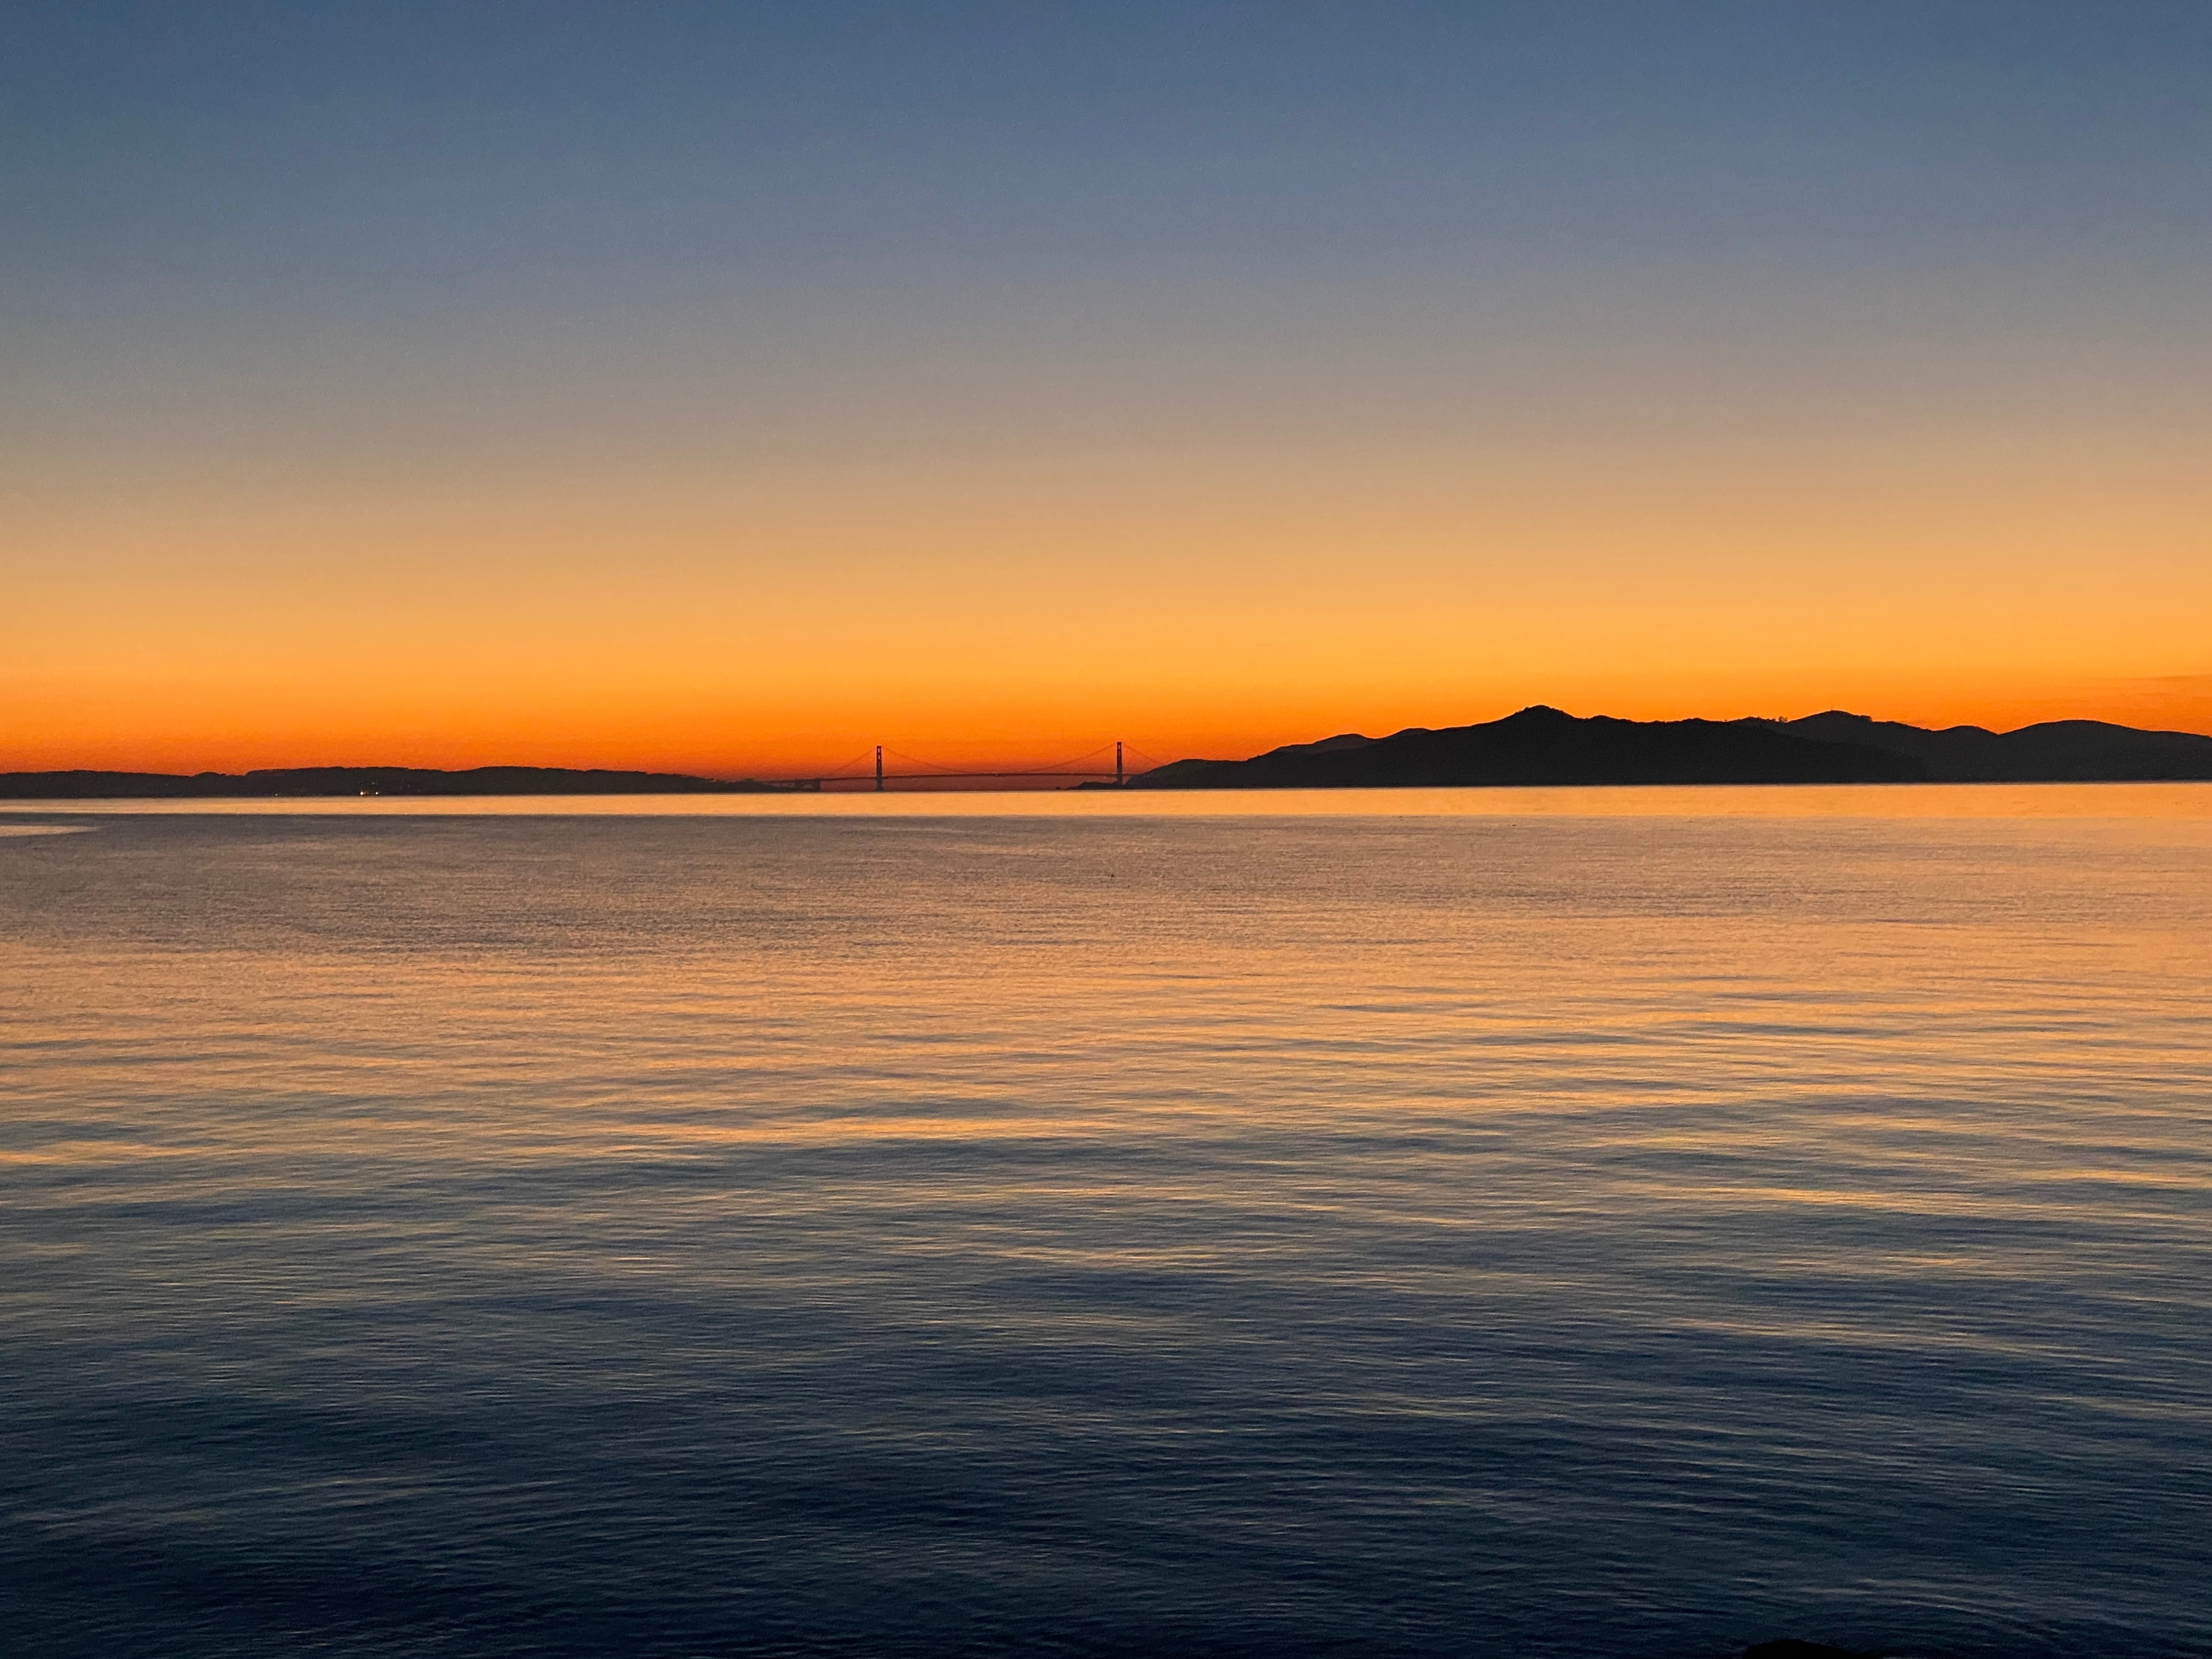 A fantastic coloring of the sky after a sundown, looking towards the bay from Berkeley.